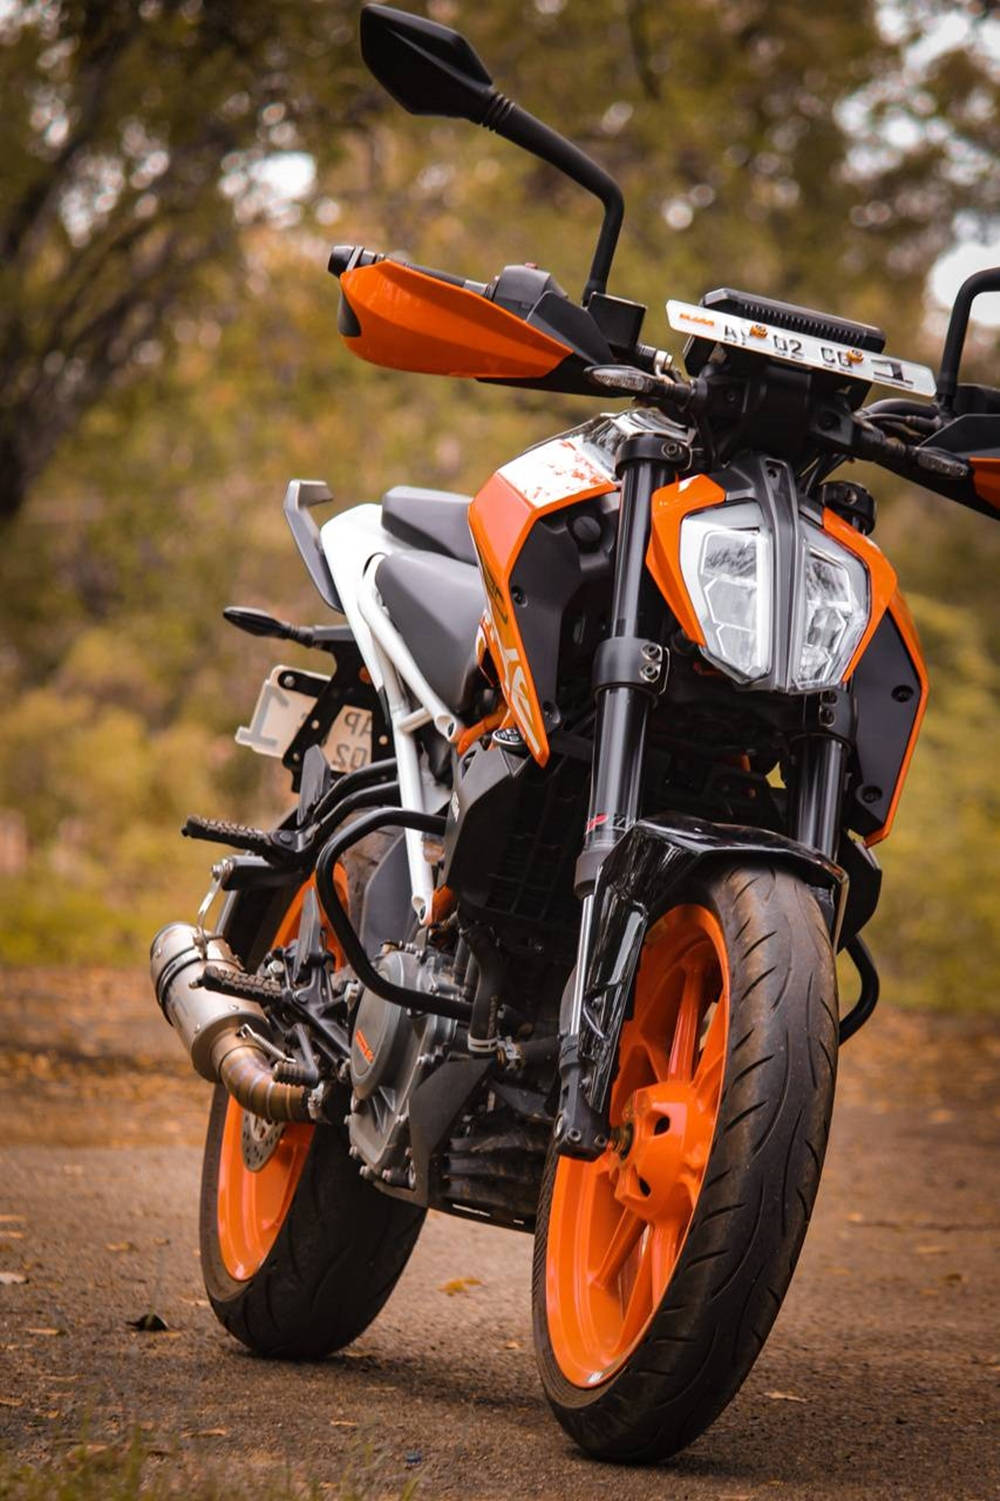 Free Ktm Rc 390 Wallpaper Downloads, [100+] Ktm Rc 390 Wallpapers for FREE  